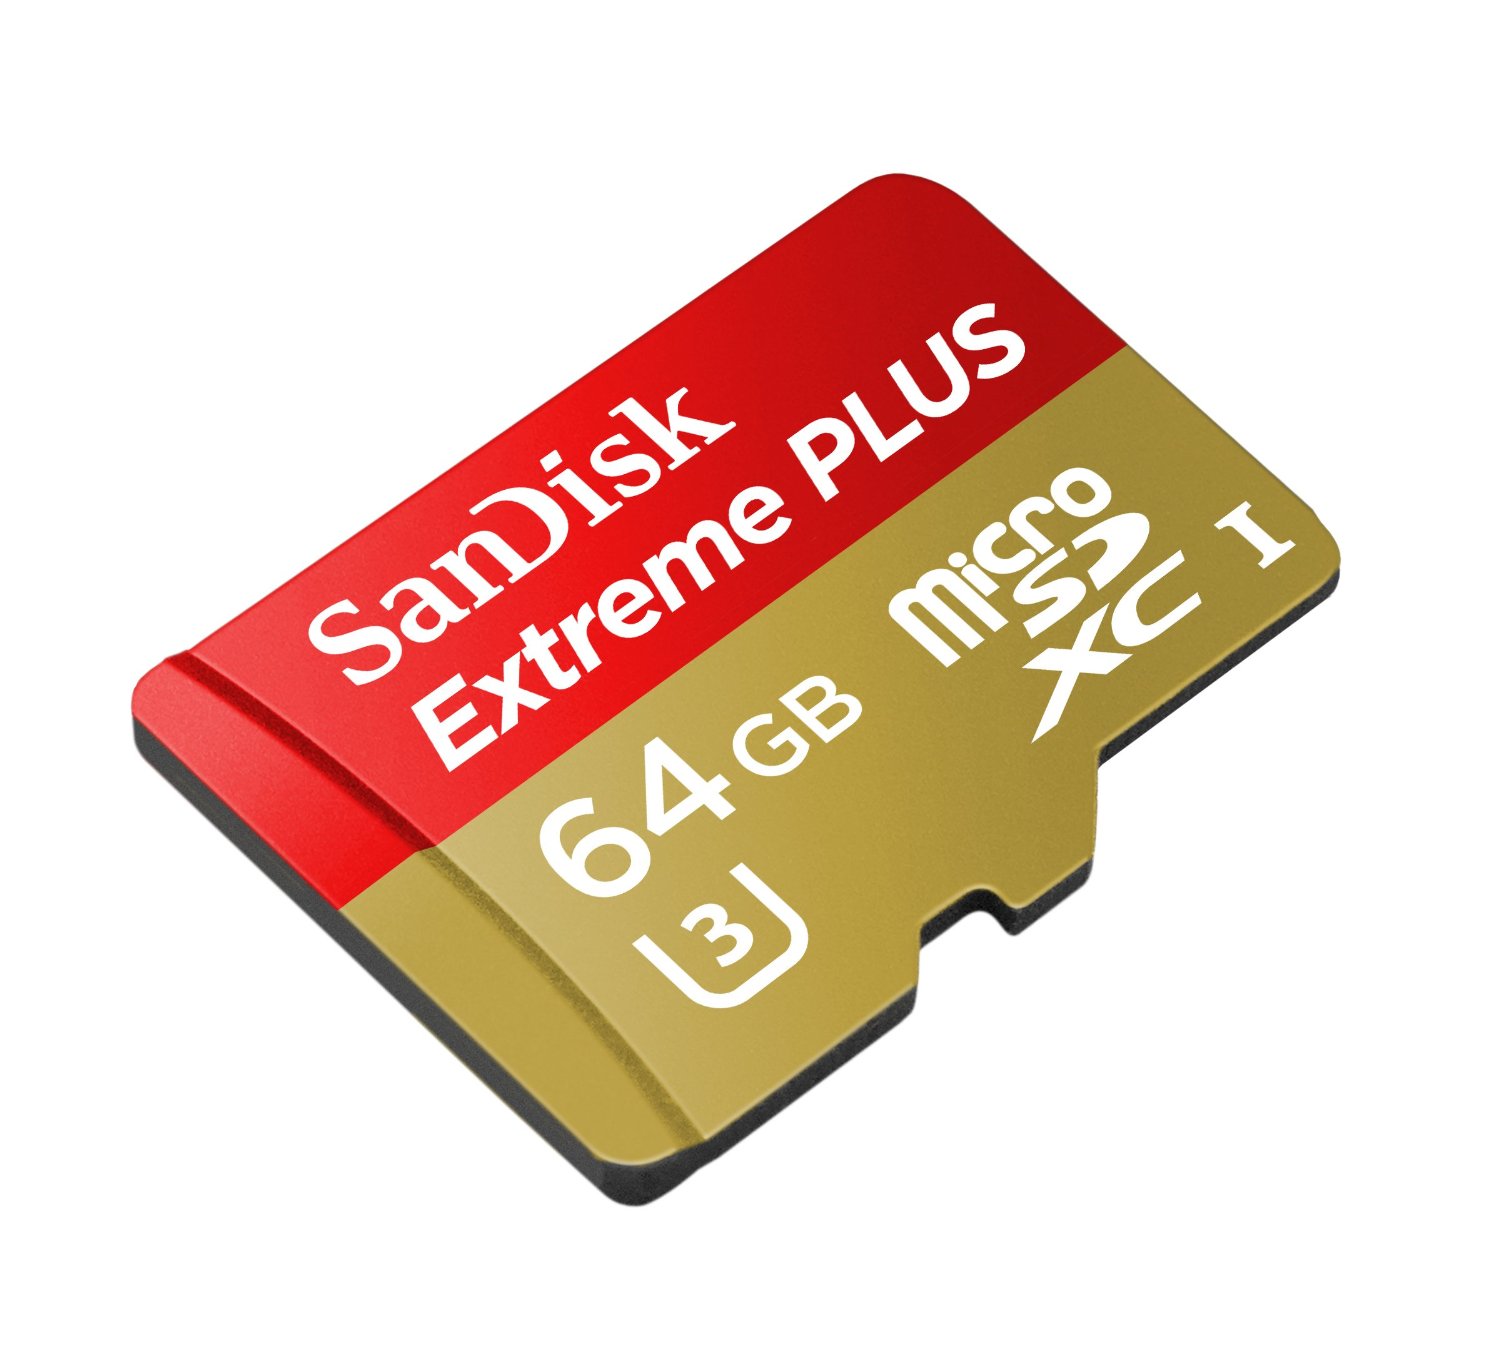 Fastest Micro SD cards